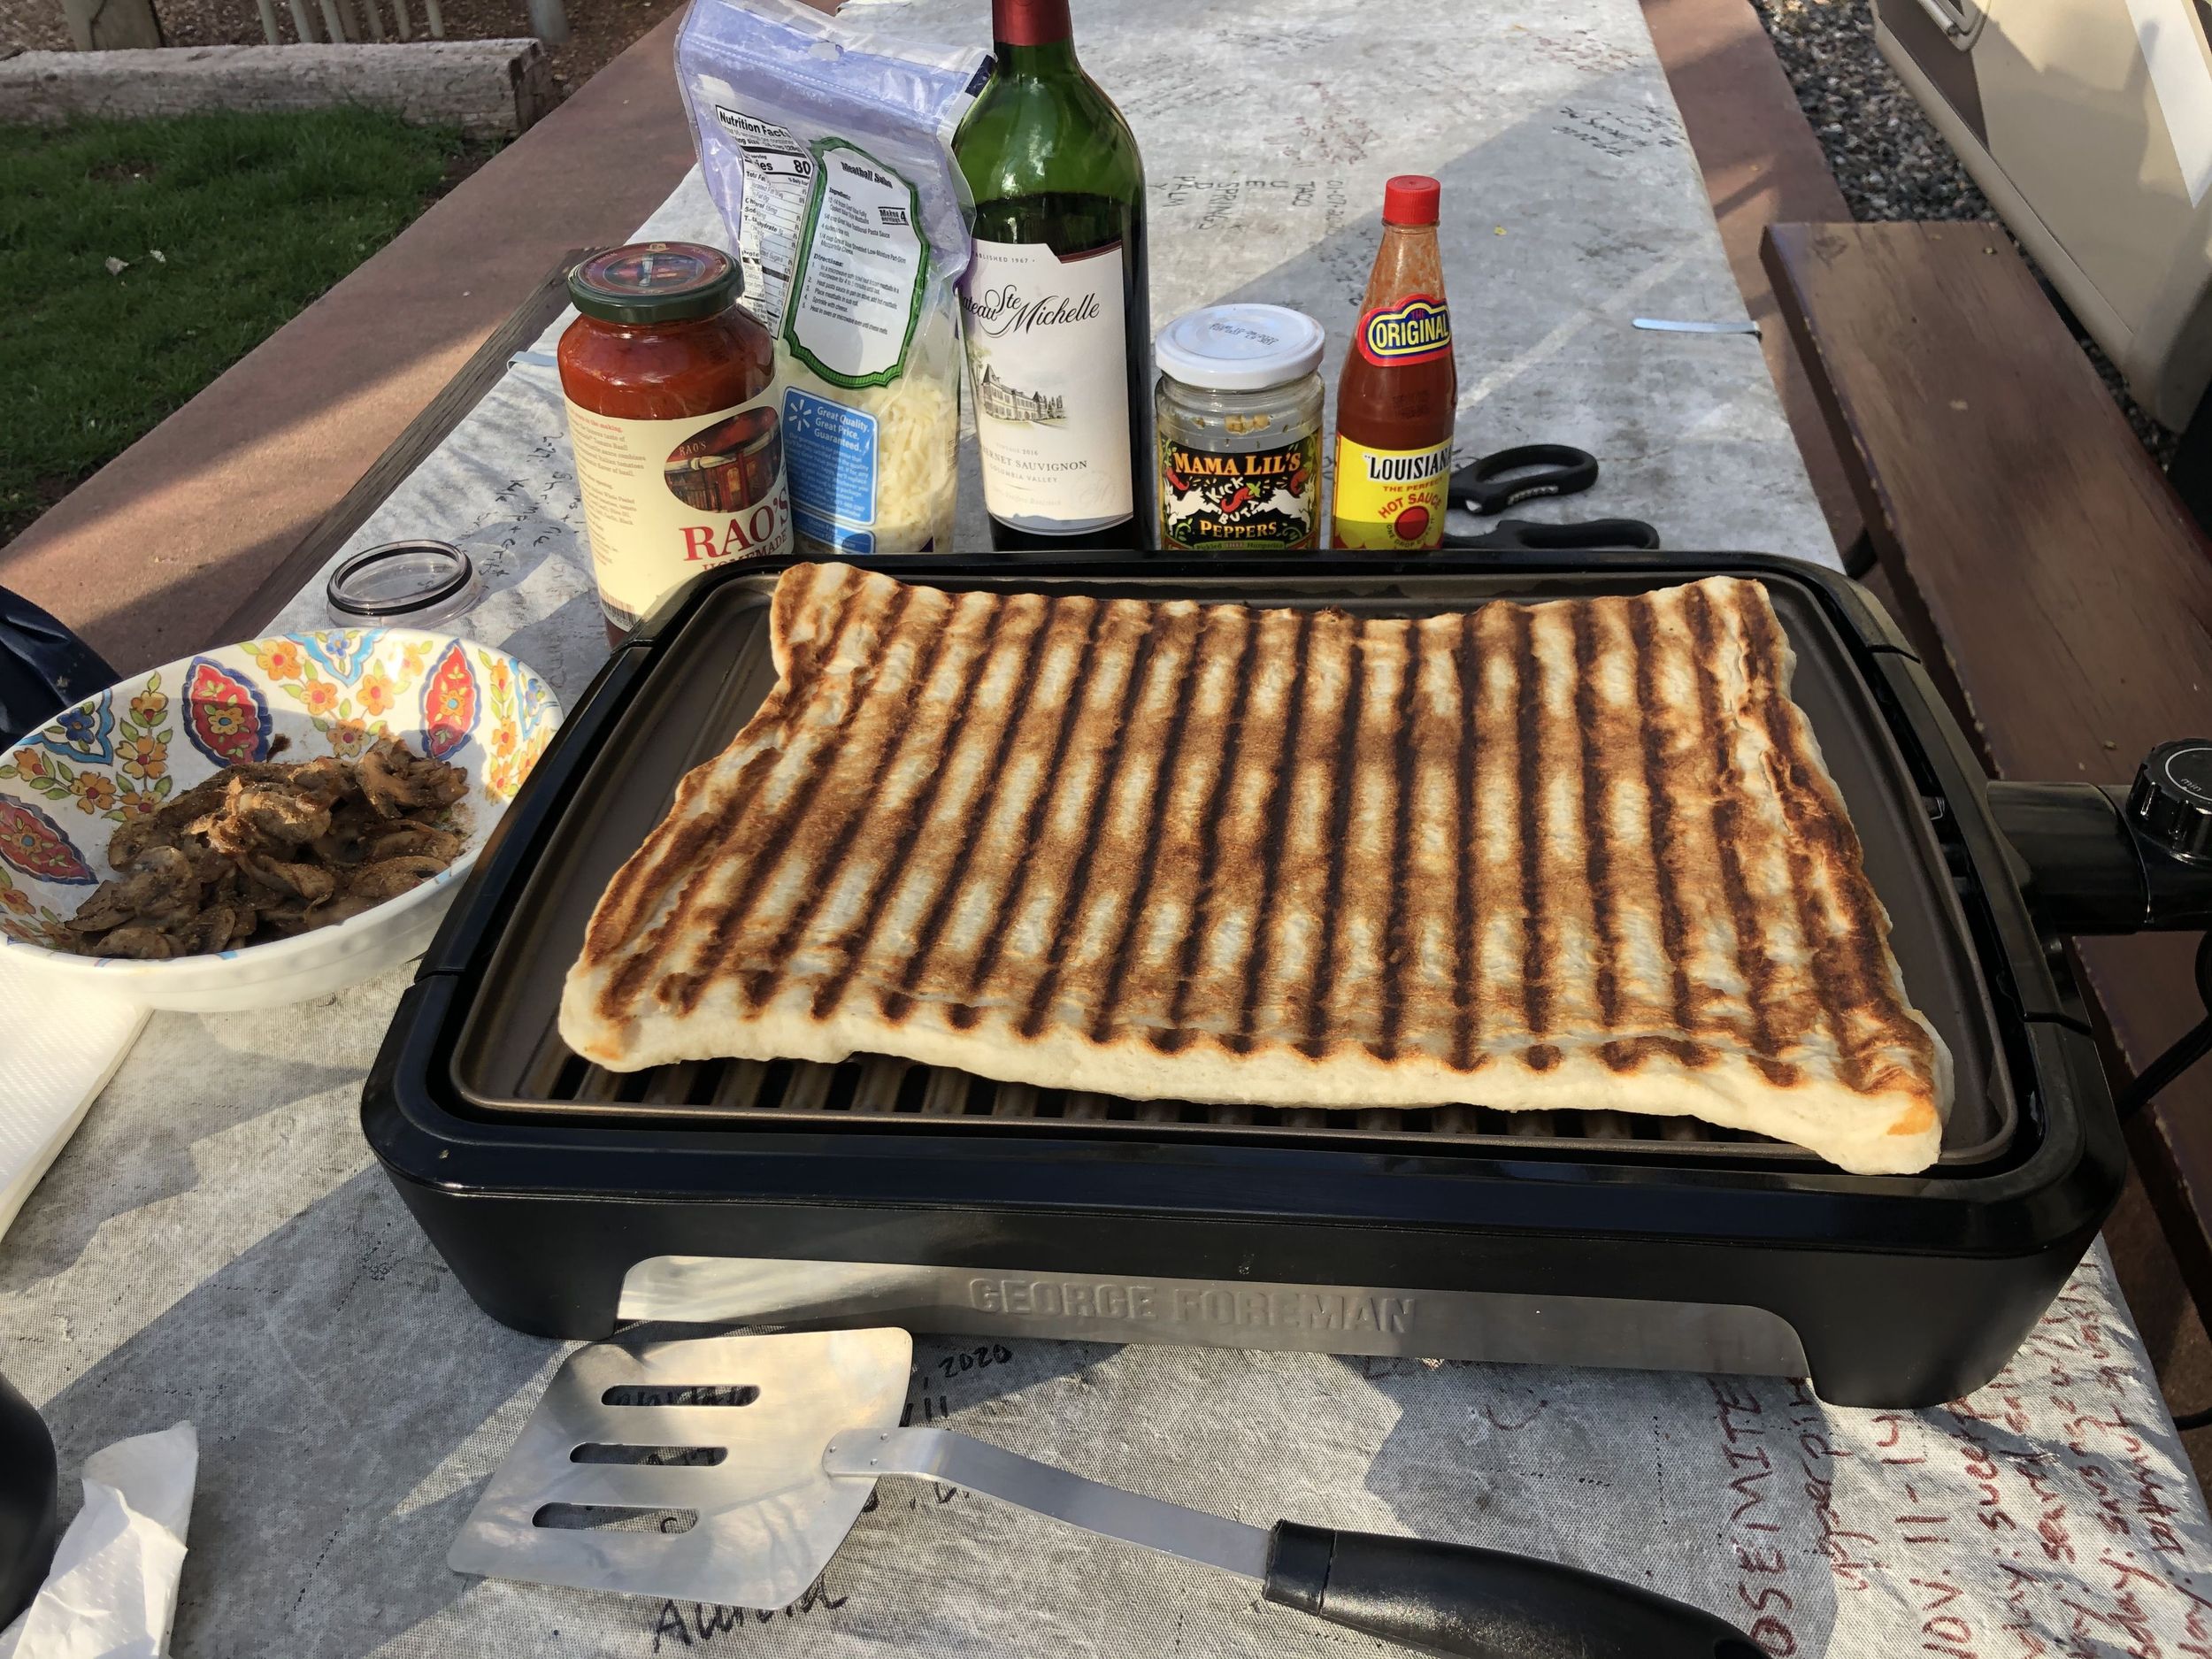 RV cooking: Pizza on the George Foreman Grill